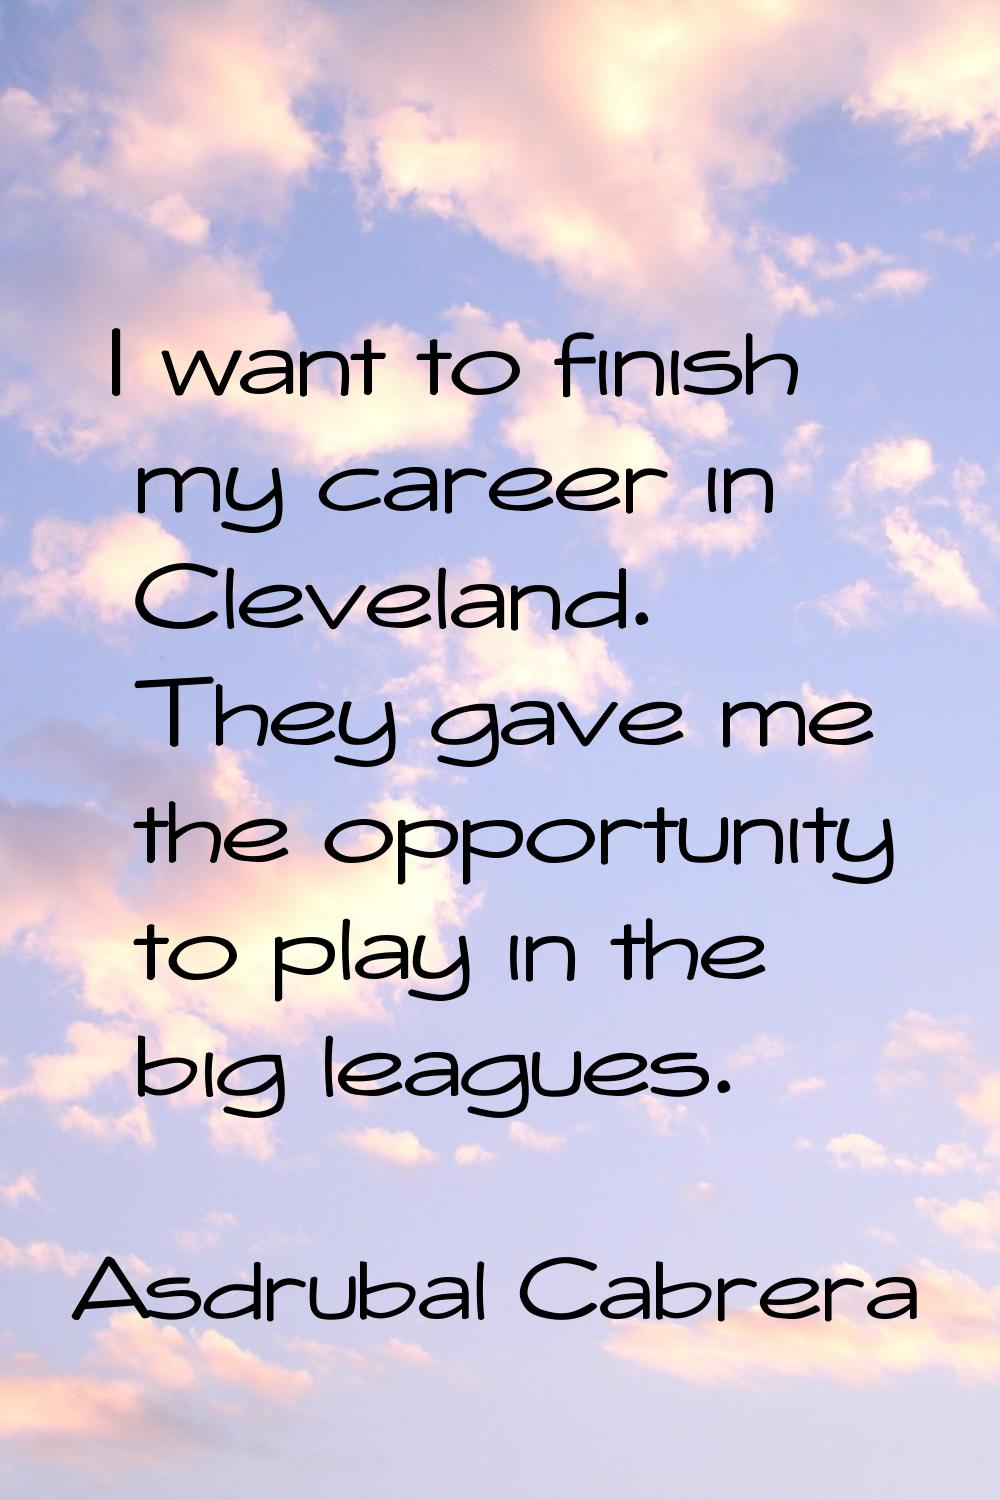 I want to finish my career in Cleveland. They gave me the opportunity to play in the big leagues.